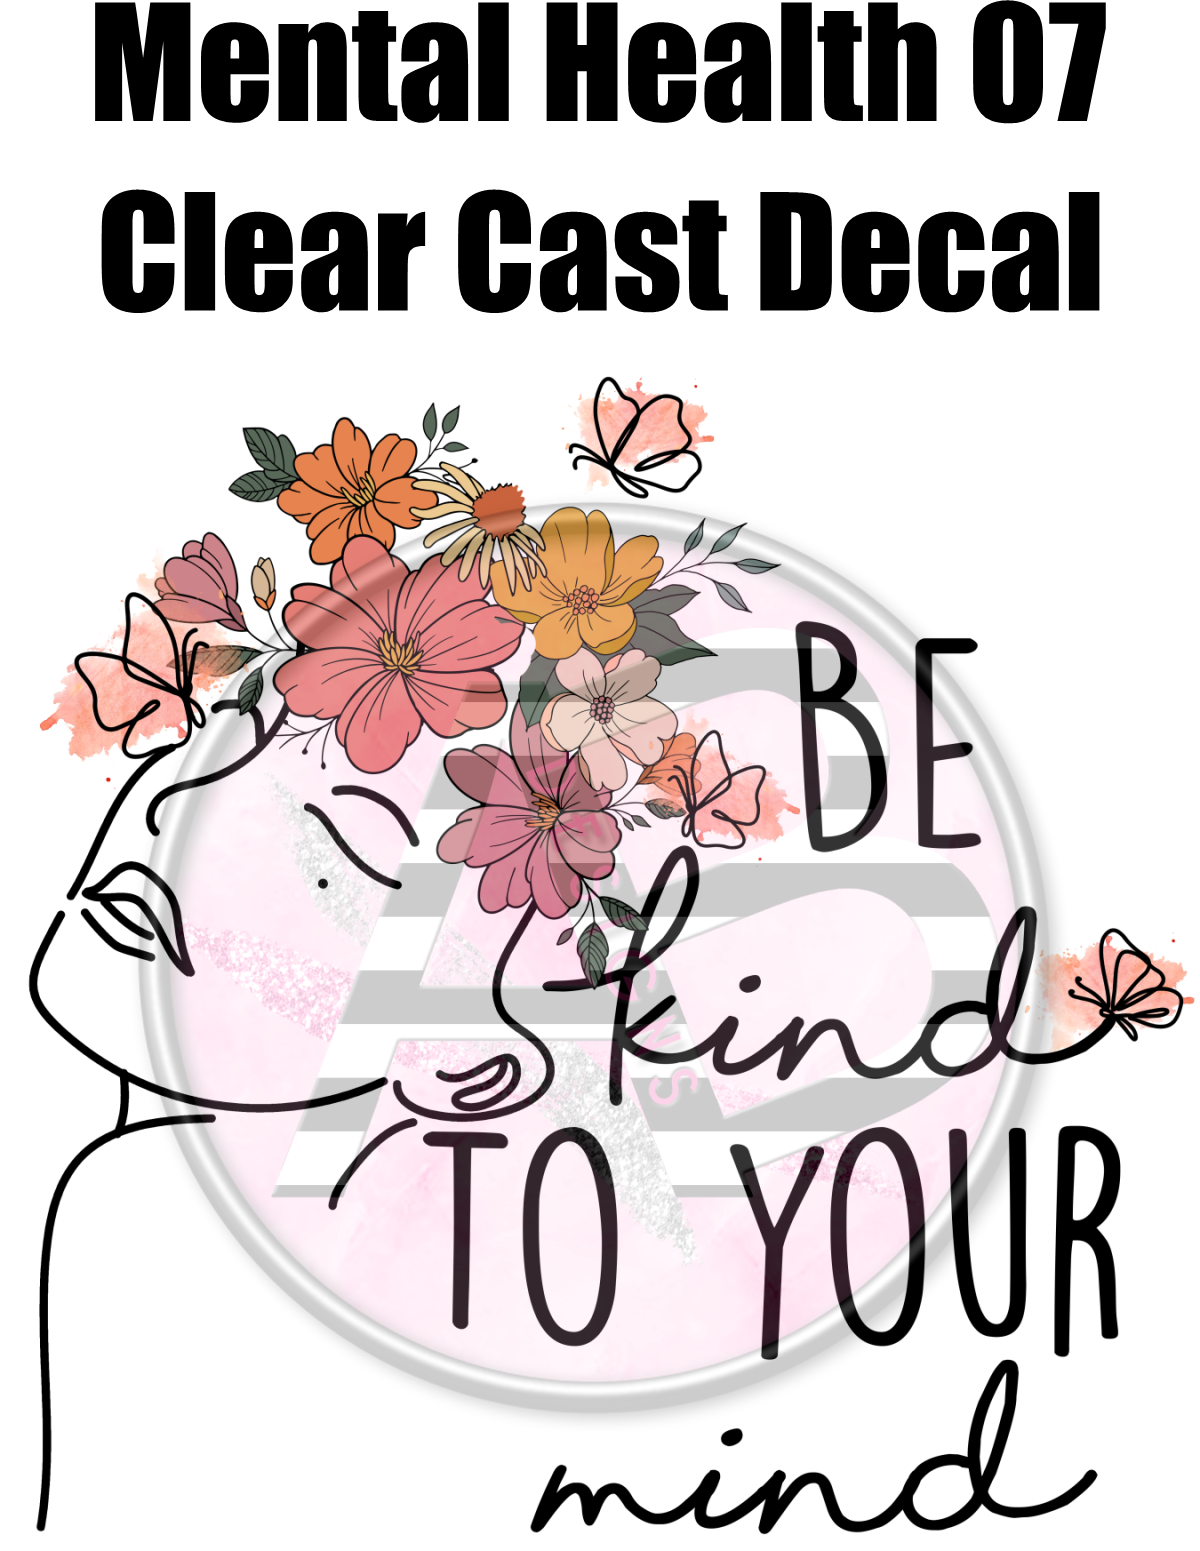 Mental Health 07 - Clear Cast Decal